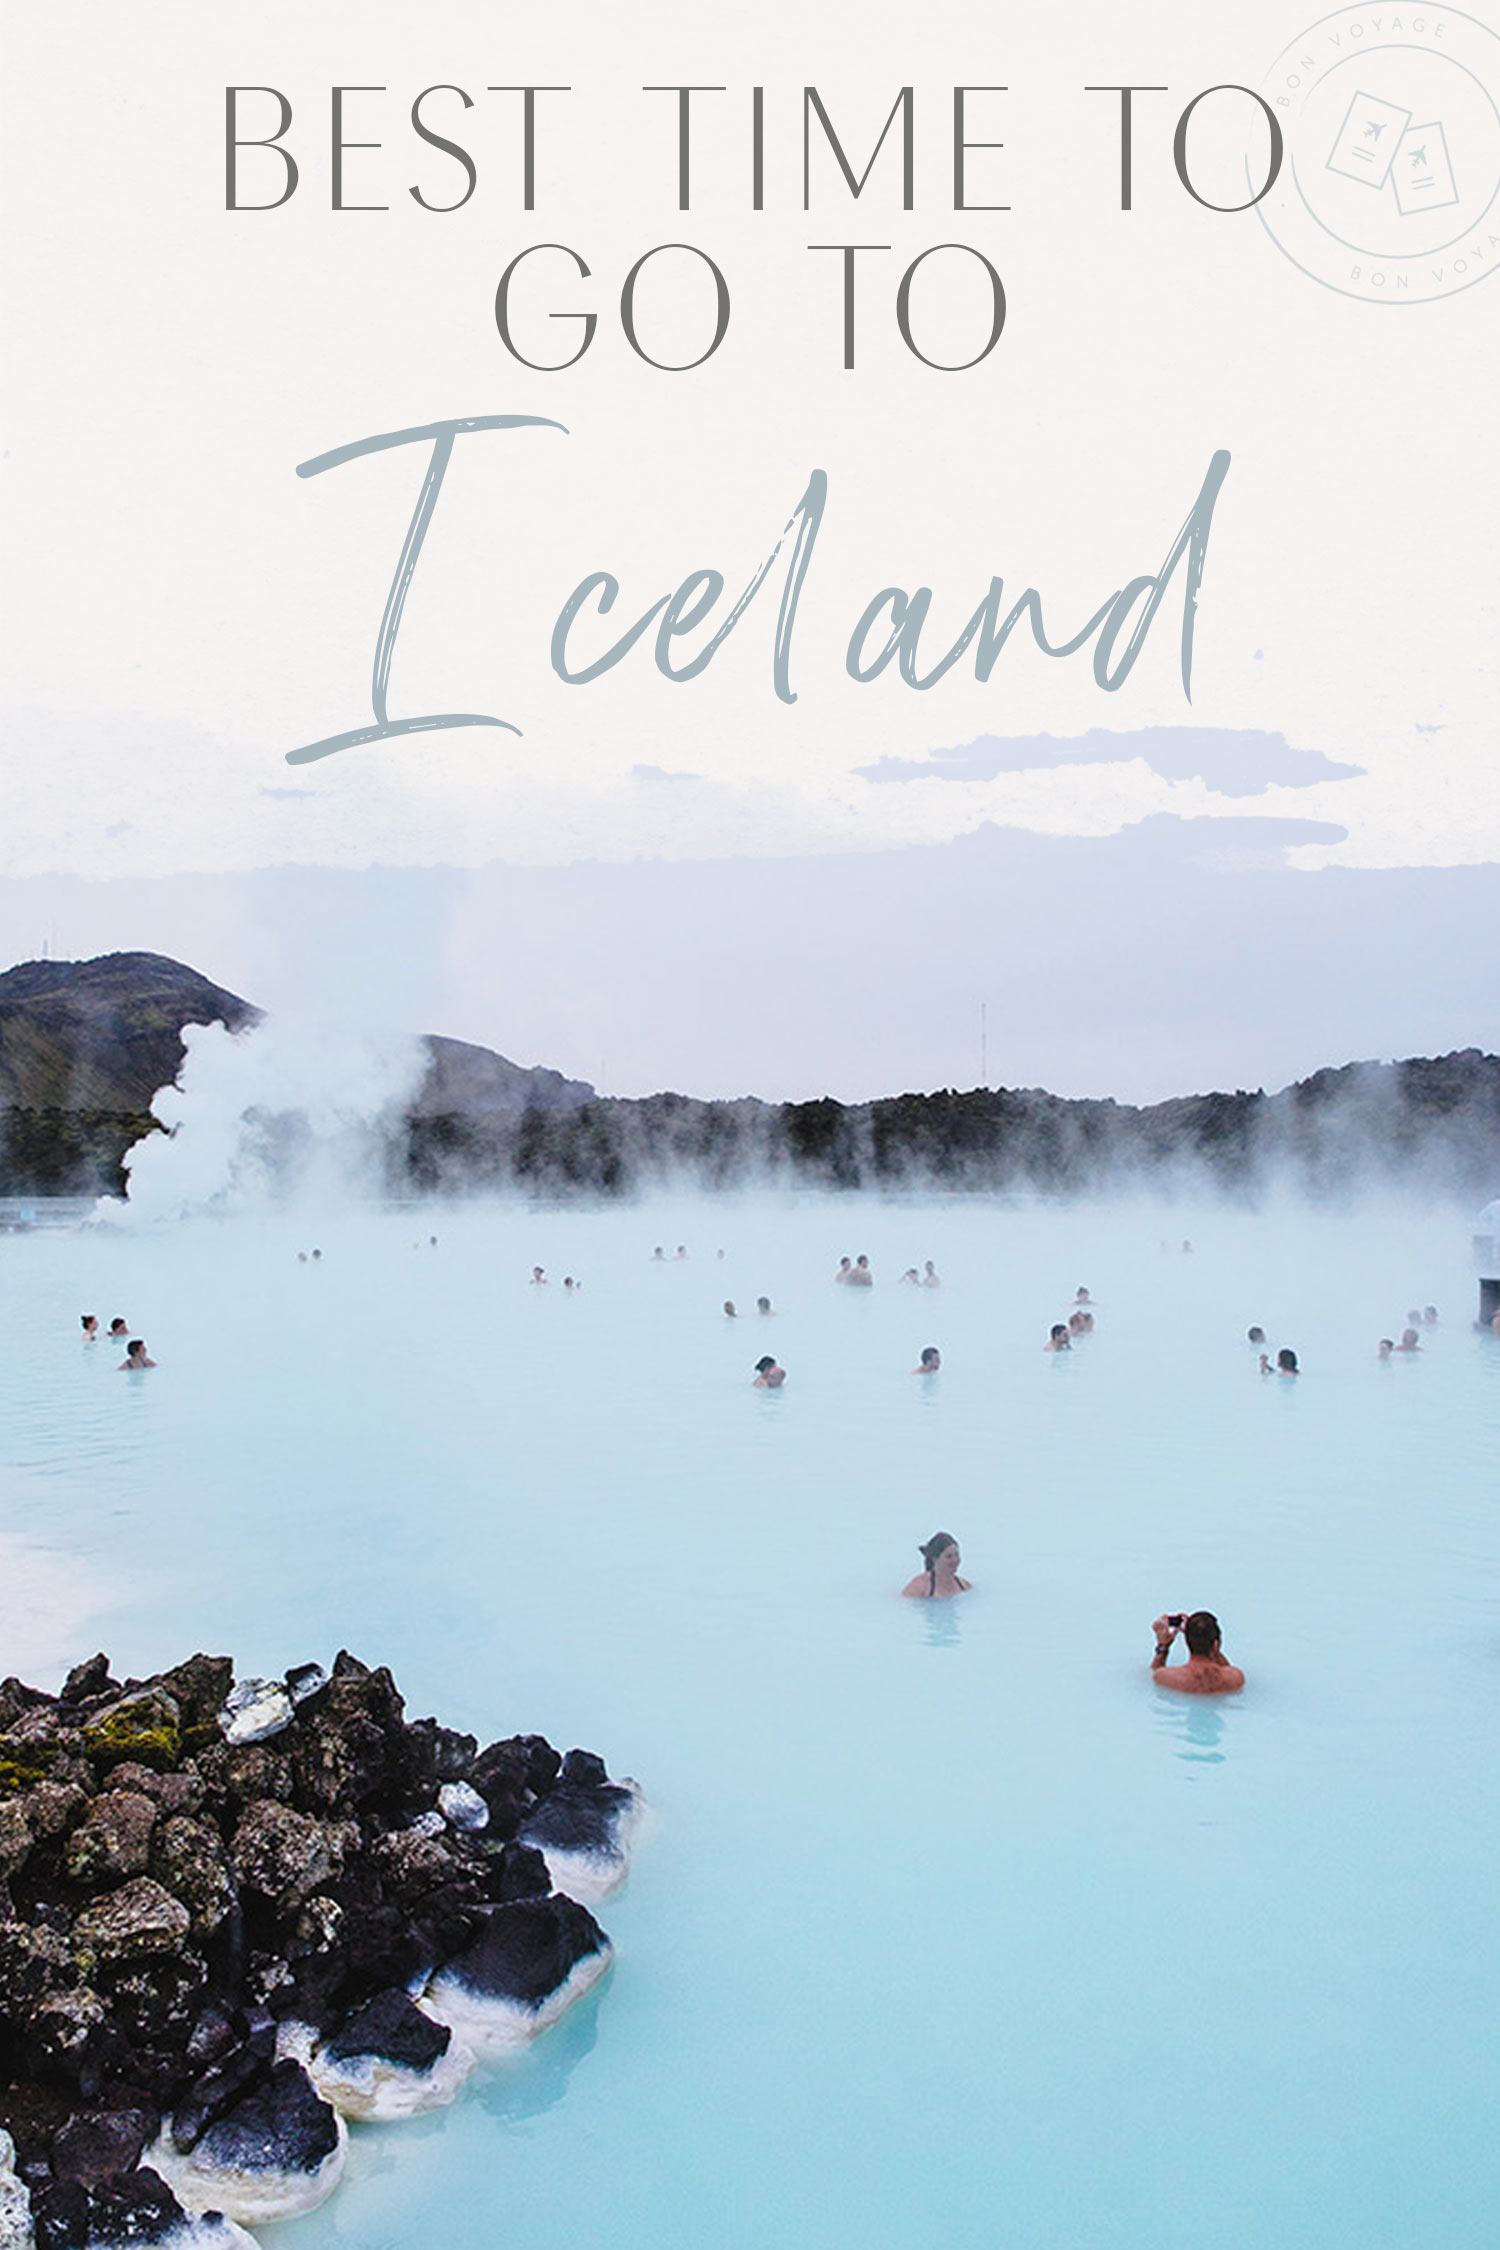 Best Time to go to Iceland